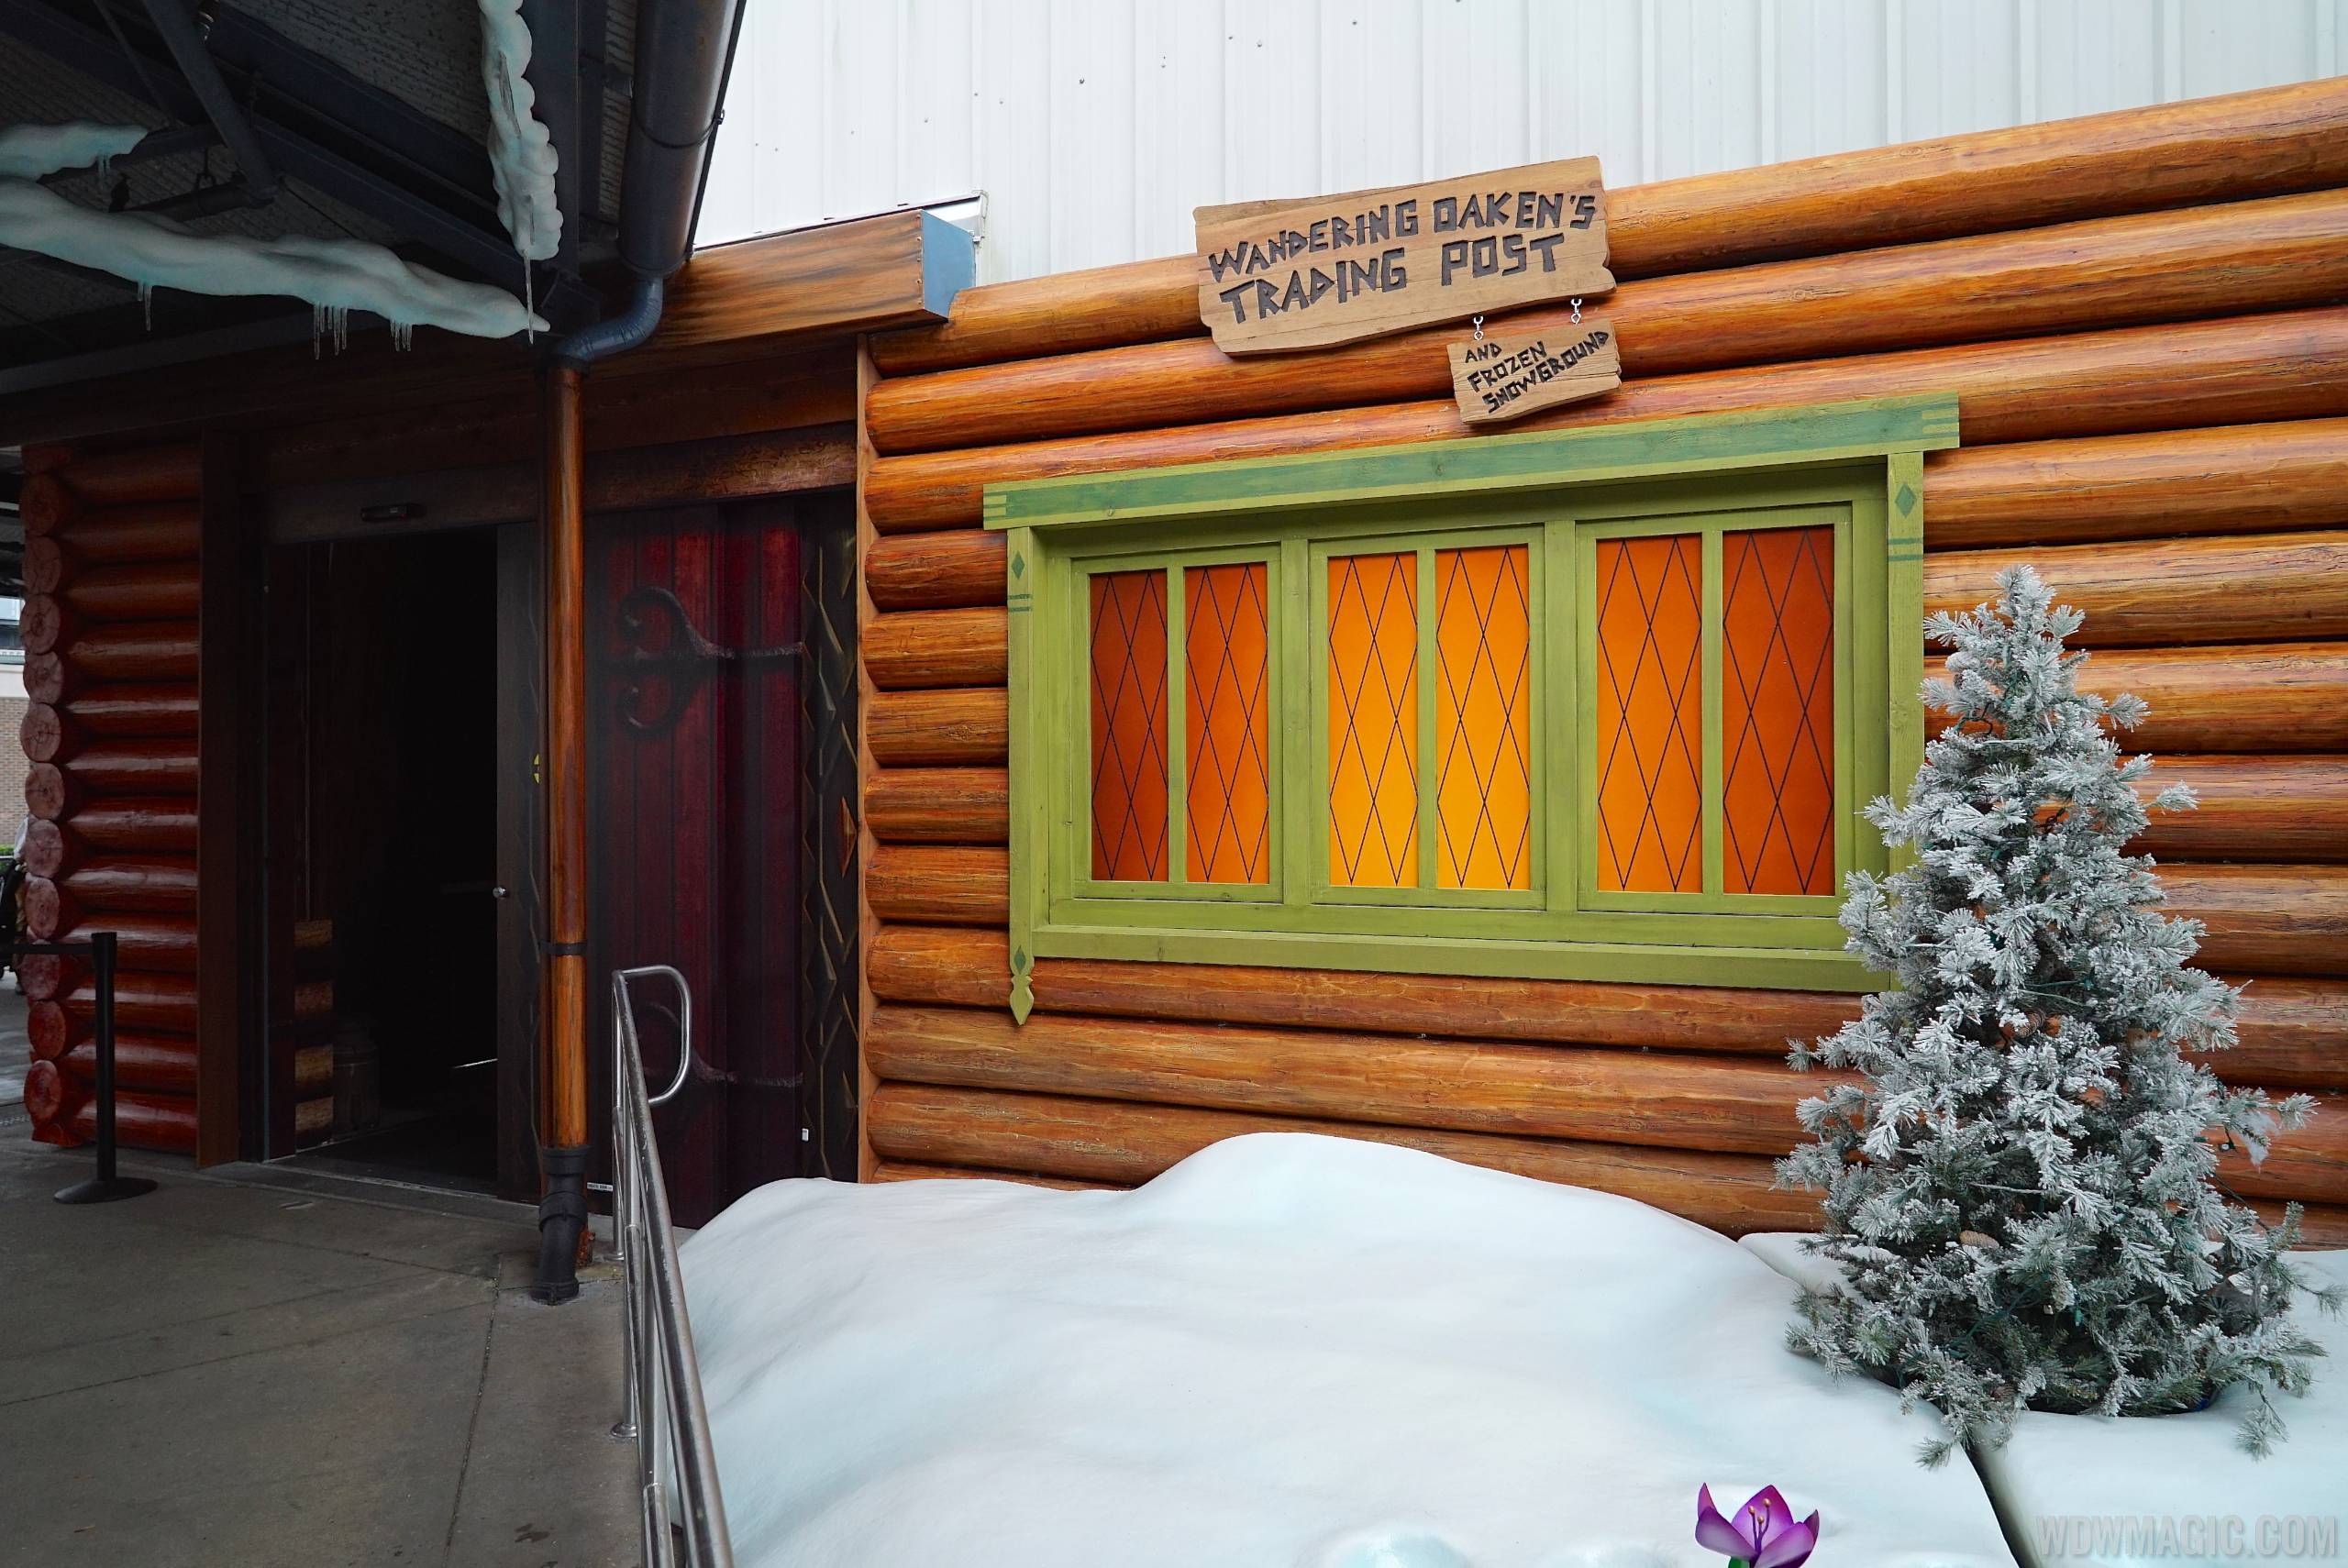 Wondering Oakens Trading Post and Frozen Snowground now closed at Disney's Hollywood Studios